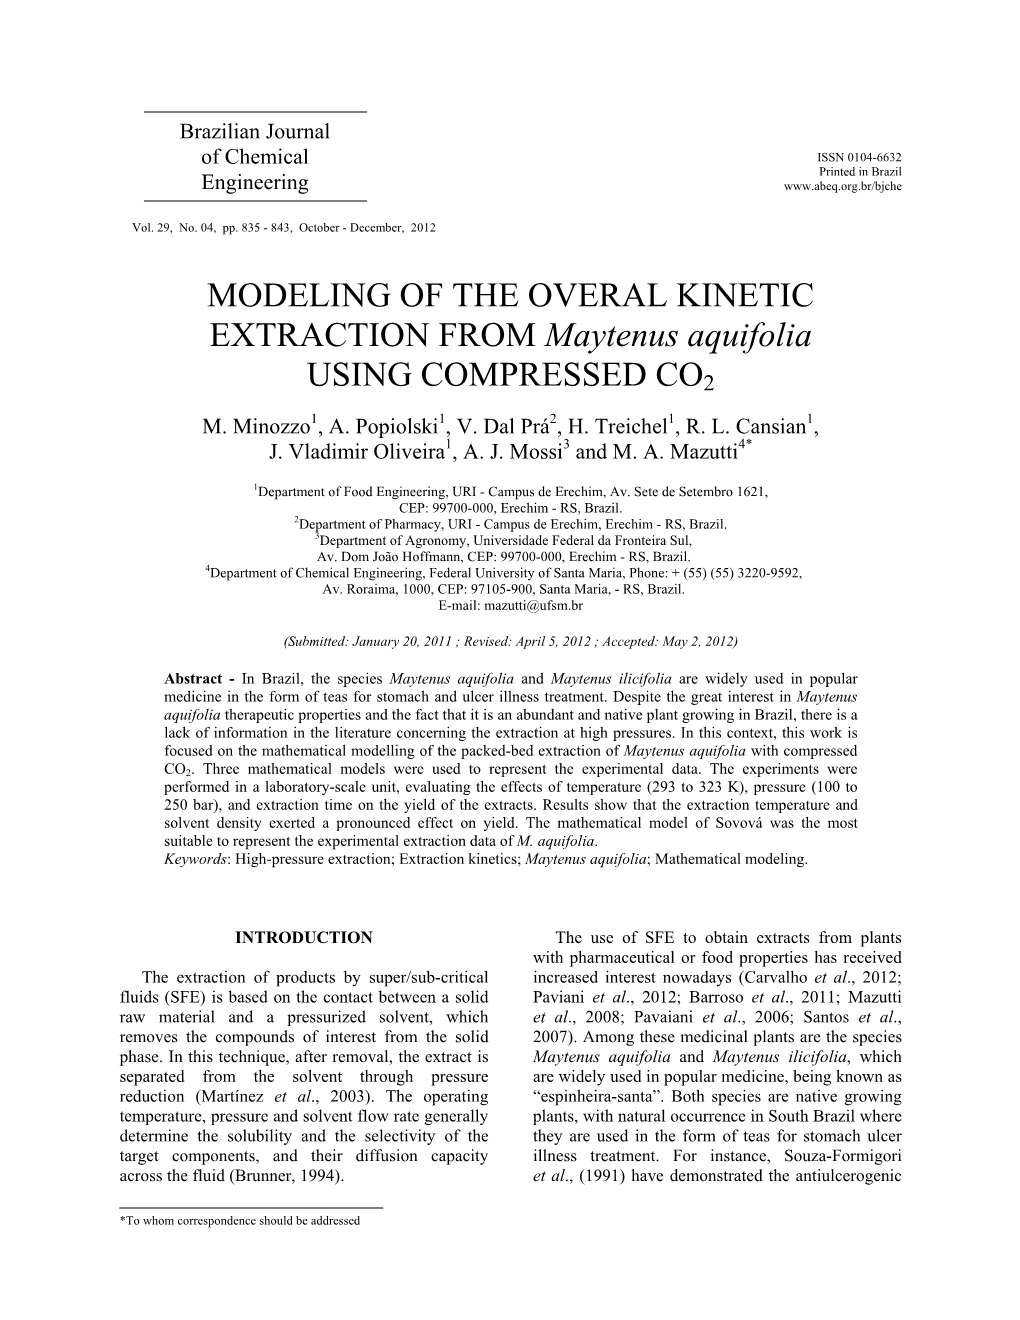 MODELING of the OVERAL KINETIC EXTRACTION from Maytenus Aquifolia USING COMPRESSED CO2